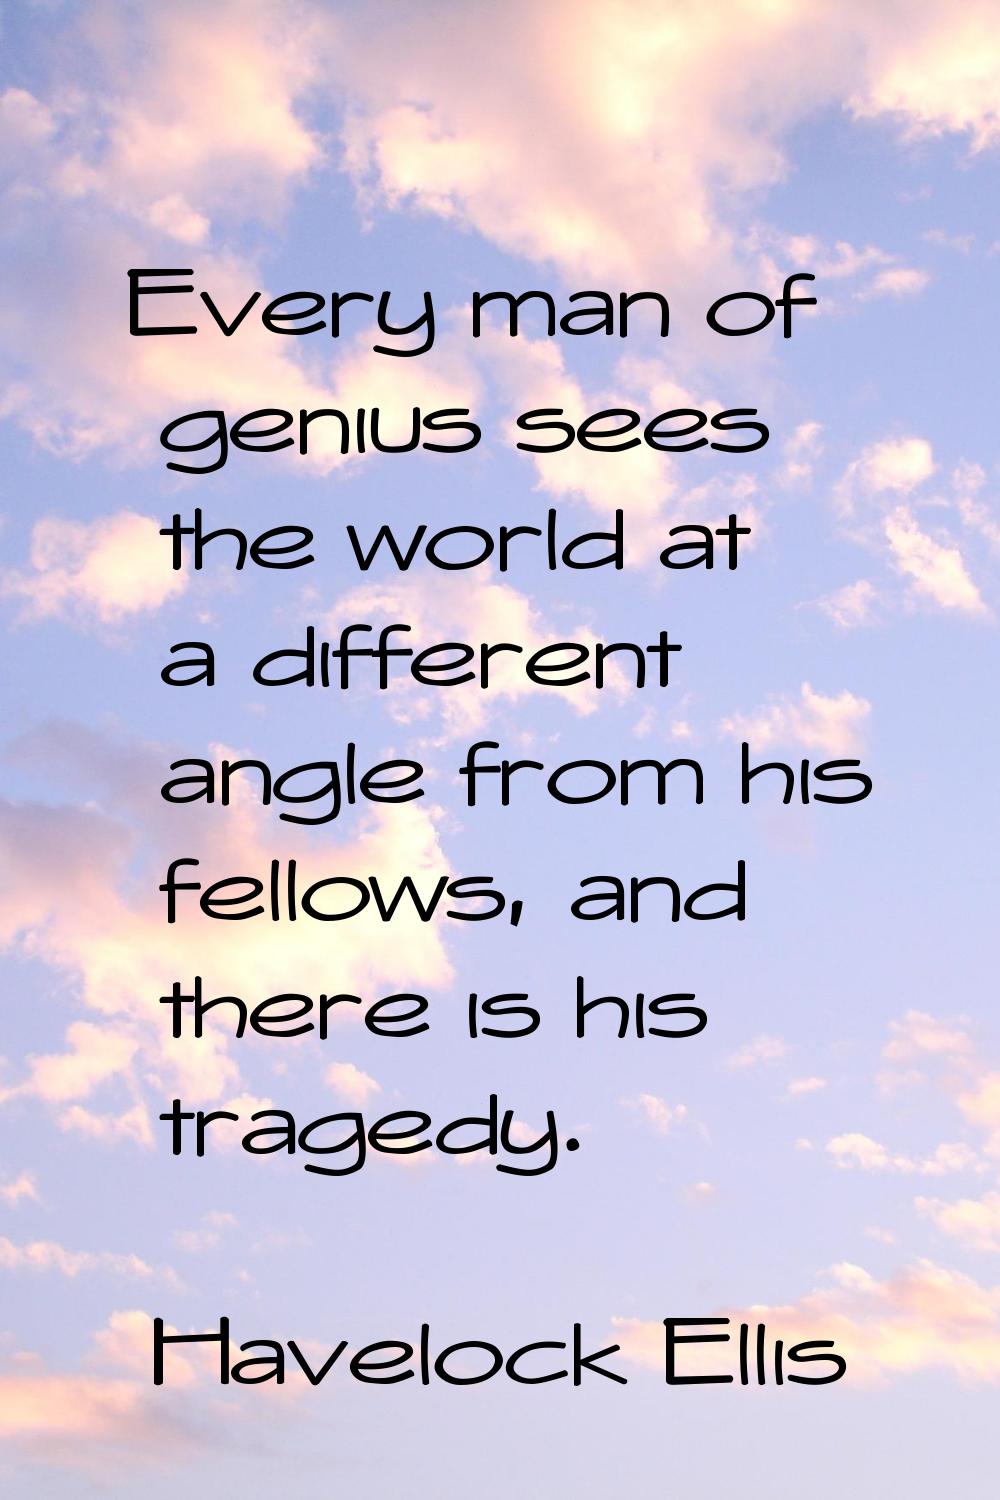 Every man of genius sees the world at a different angle from his fellows, and there is his tragedy.